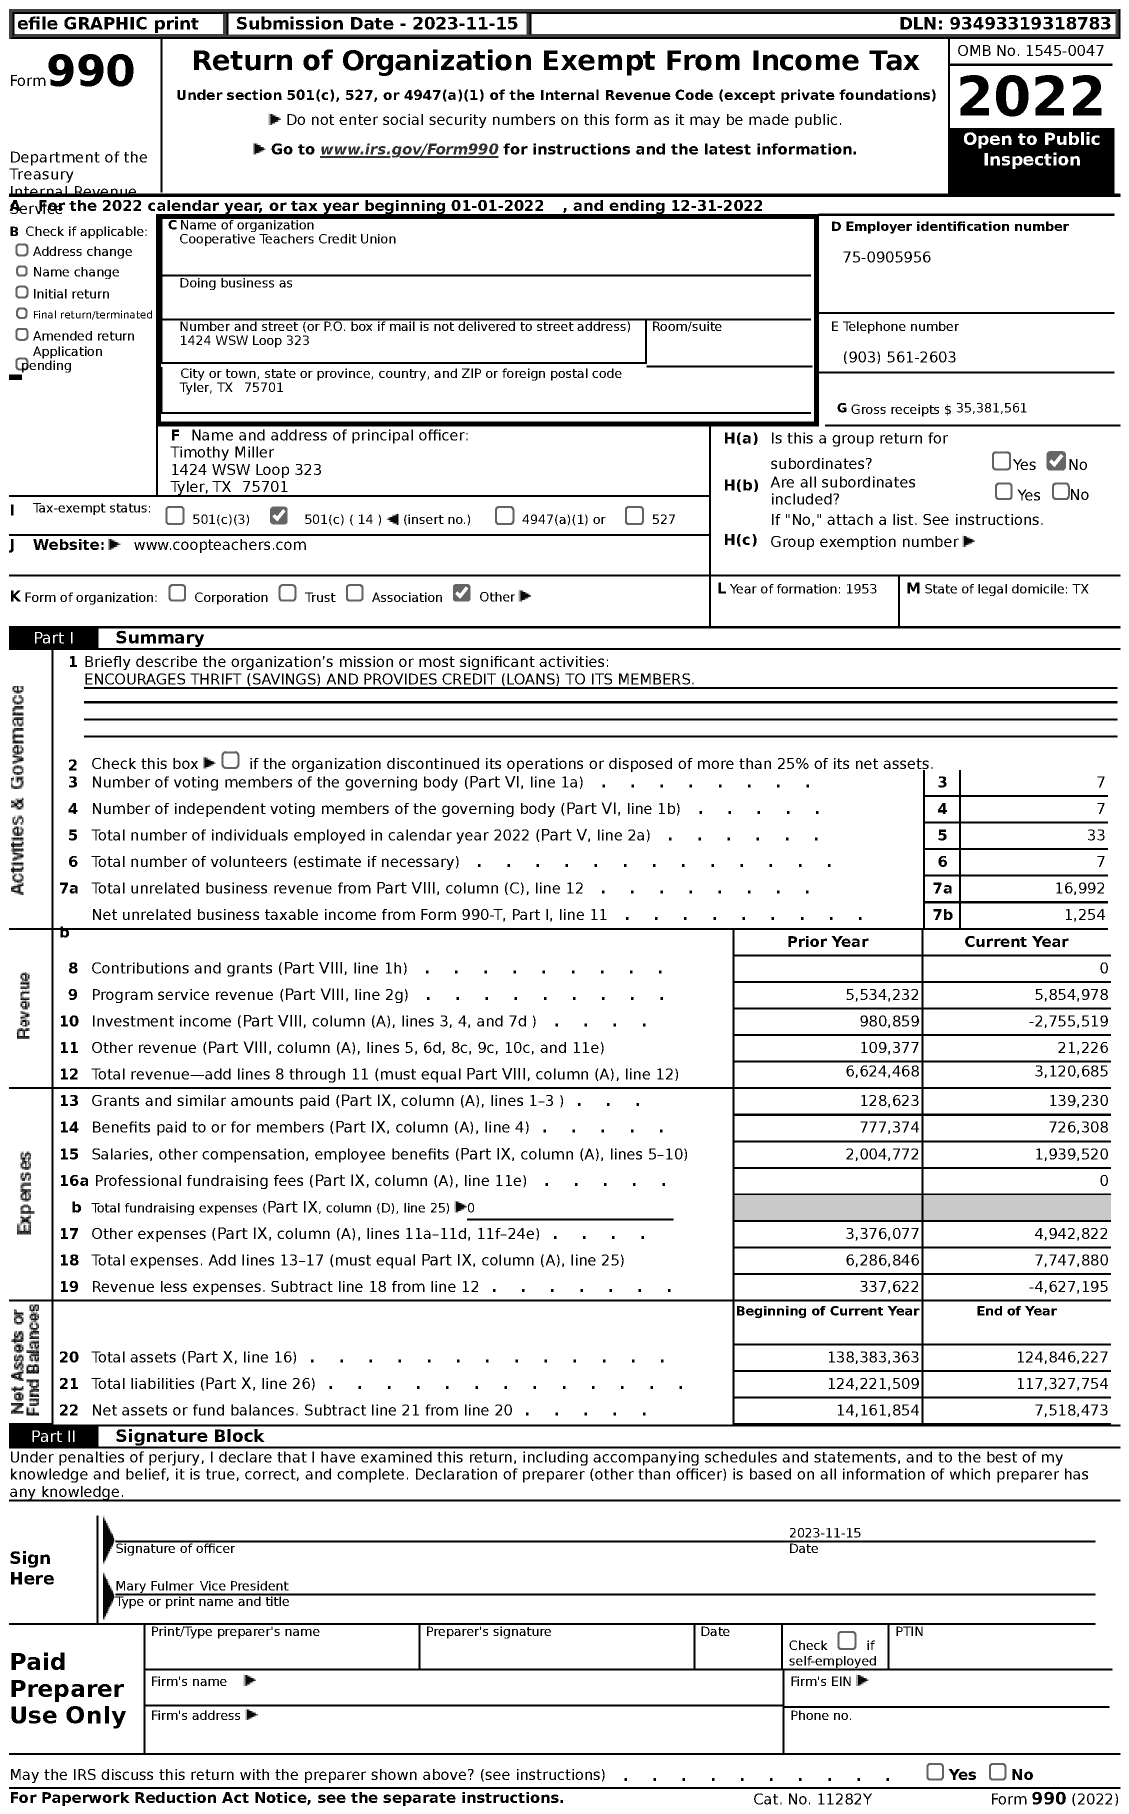 Image of first page of 2022 Form 990 for Cooperative Teachers Credit Union (CTCU)